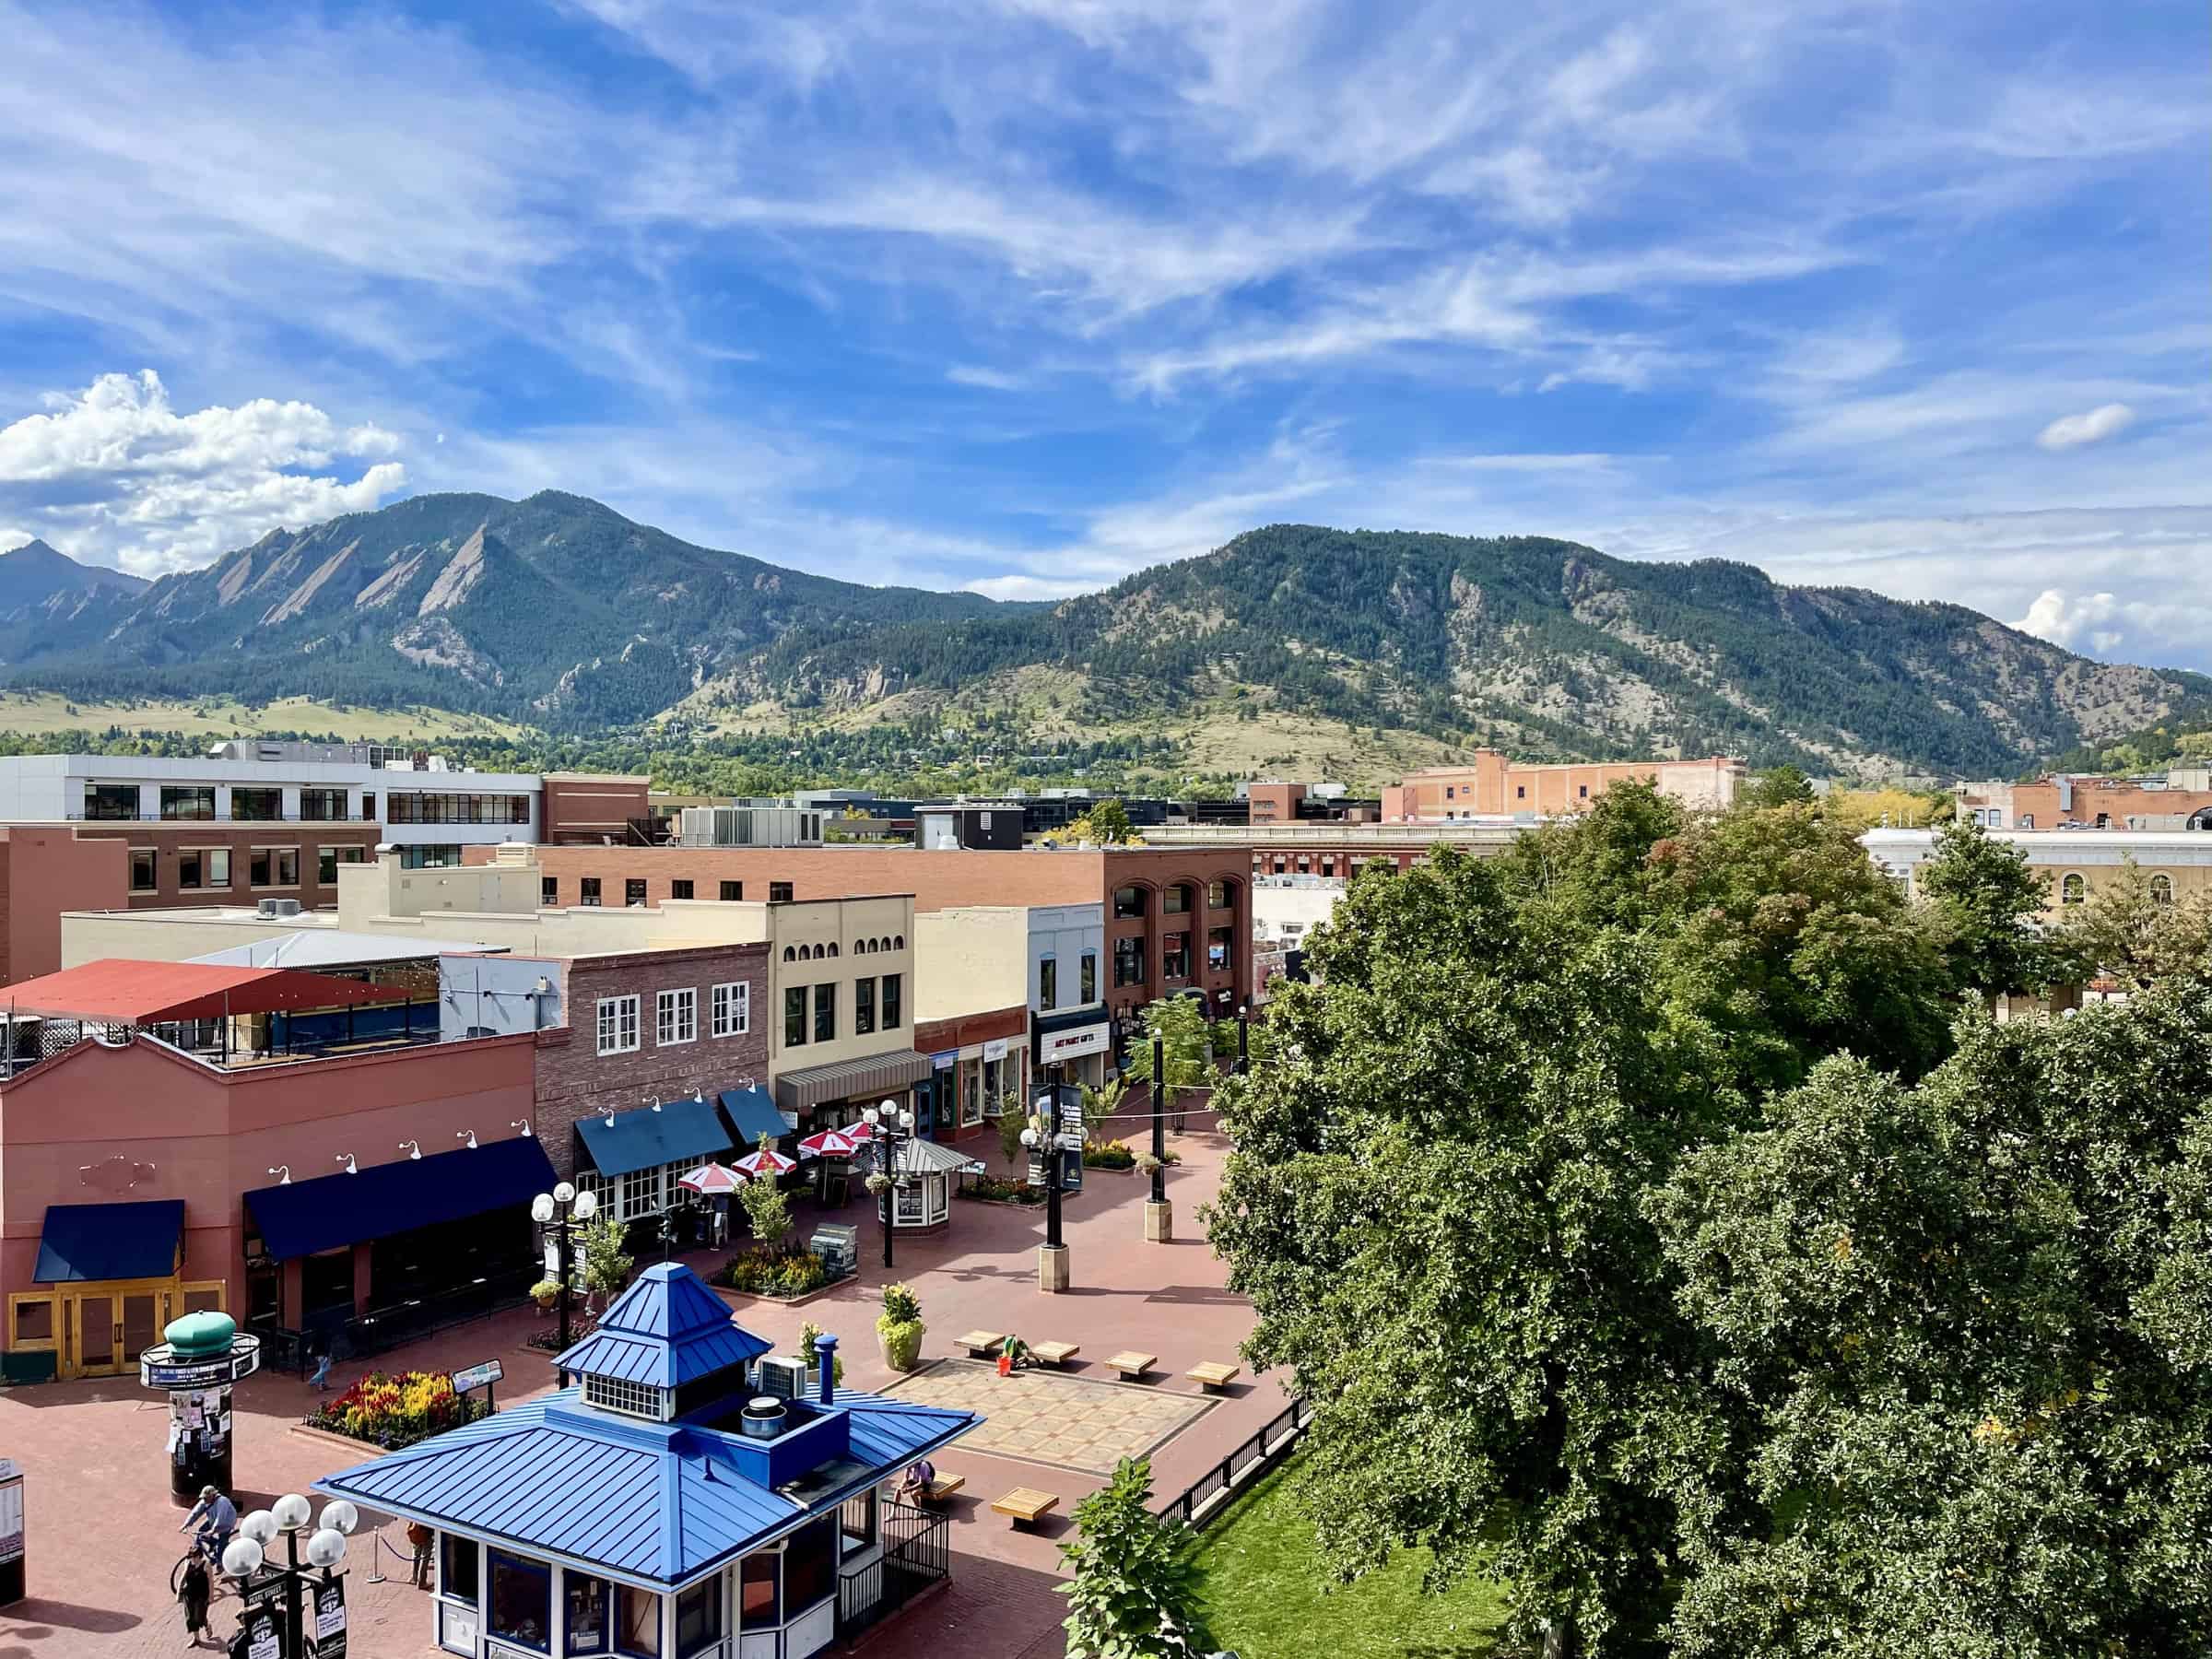 A picturesque view of Boulder, Colorado, with a vibrant cityscape in the foreground featuring distinctive architecture and a public square, set against the stunning backdrop of the Rocky Mountains under a clear blue sky.